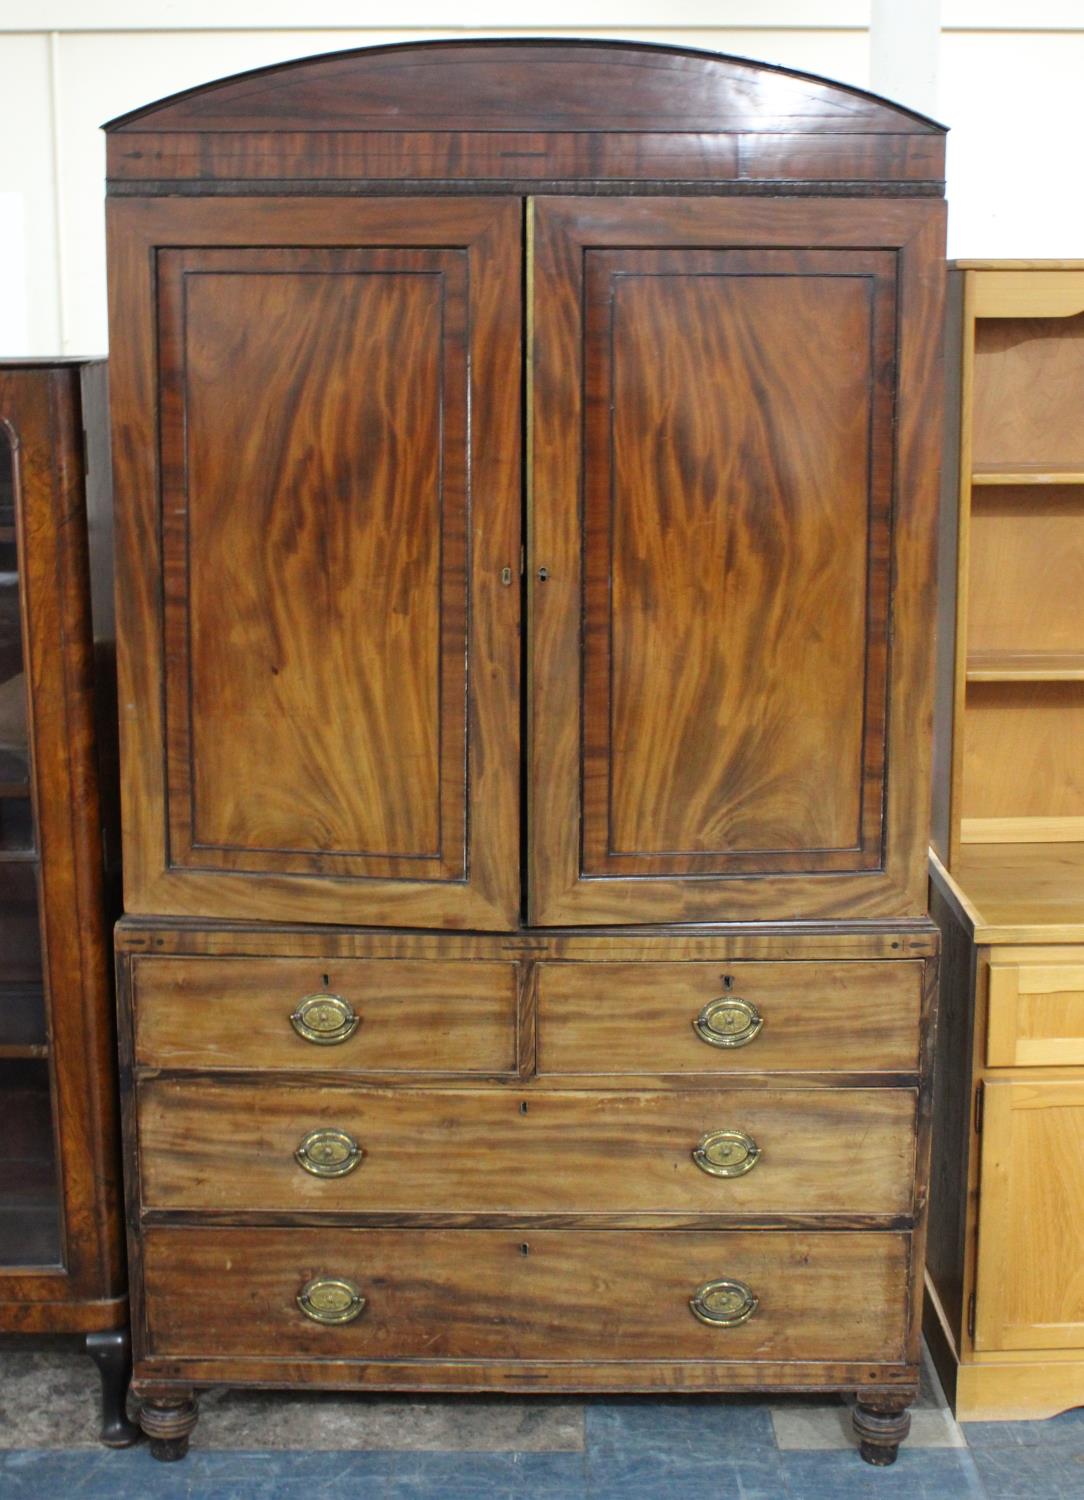 A 19th Century String Inlaid Mahogany Linen Press, the Base Section with Two Short and Two Long